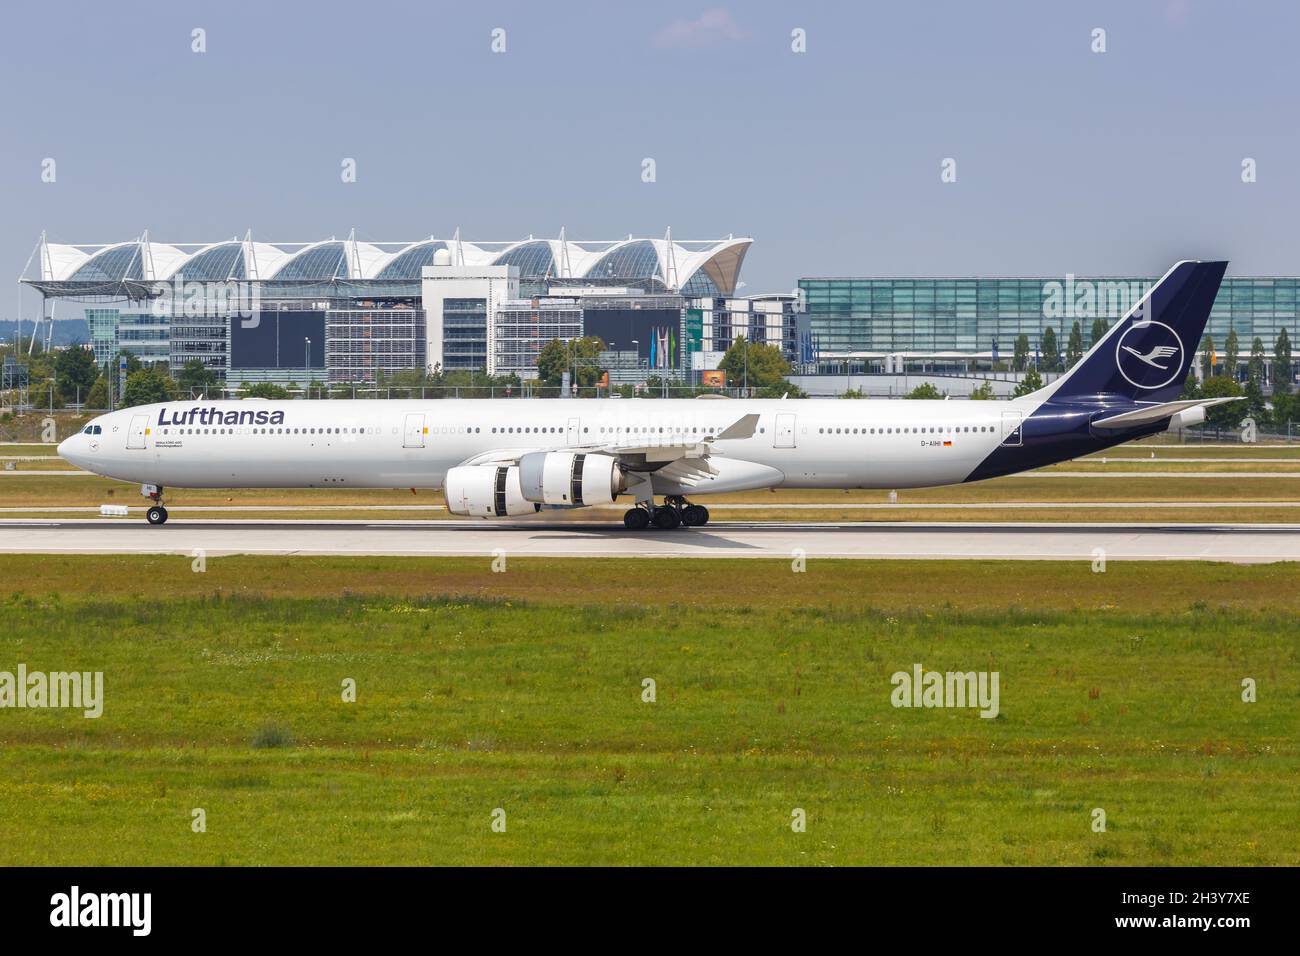 Lufthansa Airbus A340-600 Aircraft Munich Airport in Germany Stock Photo